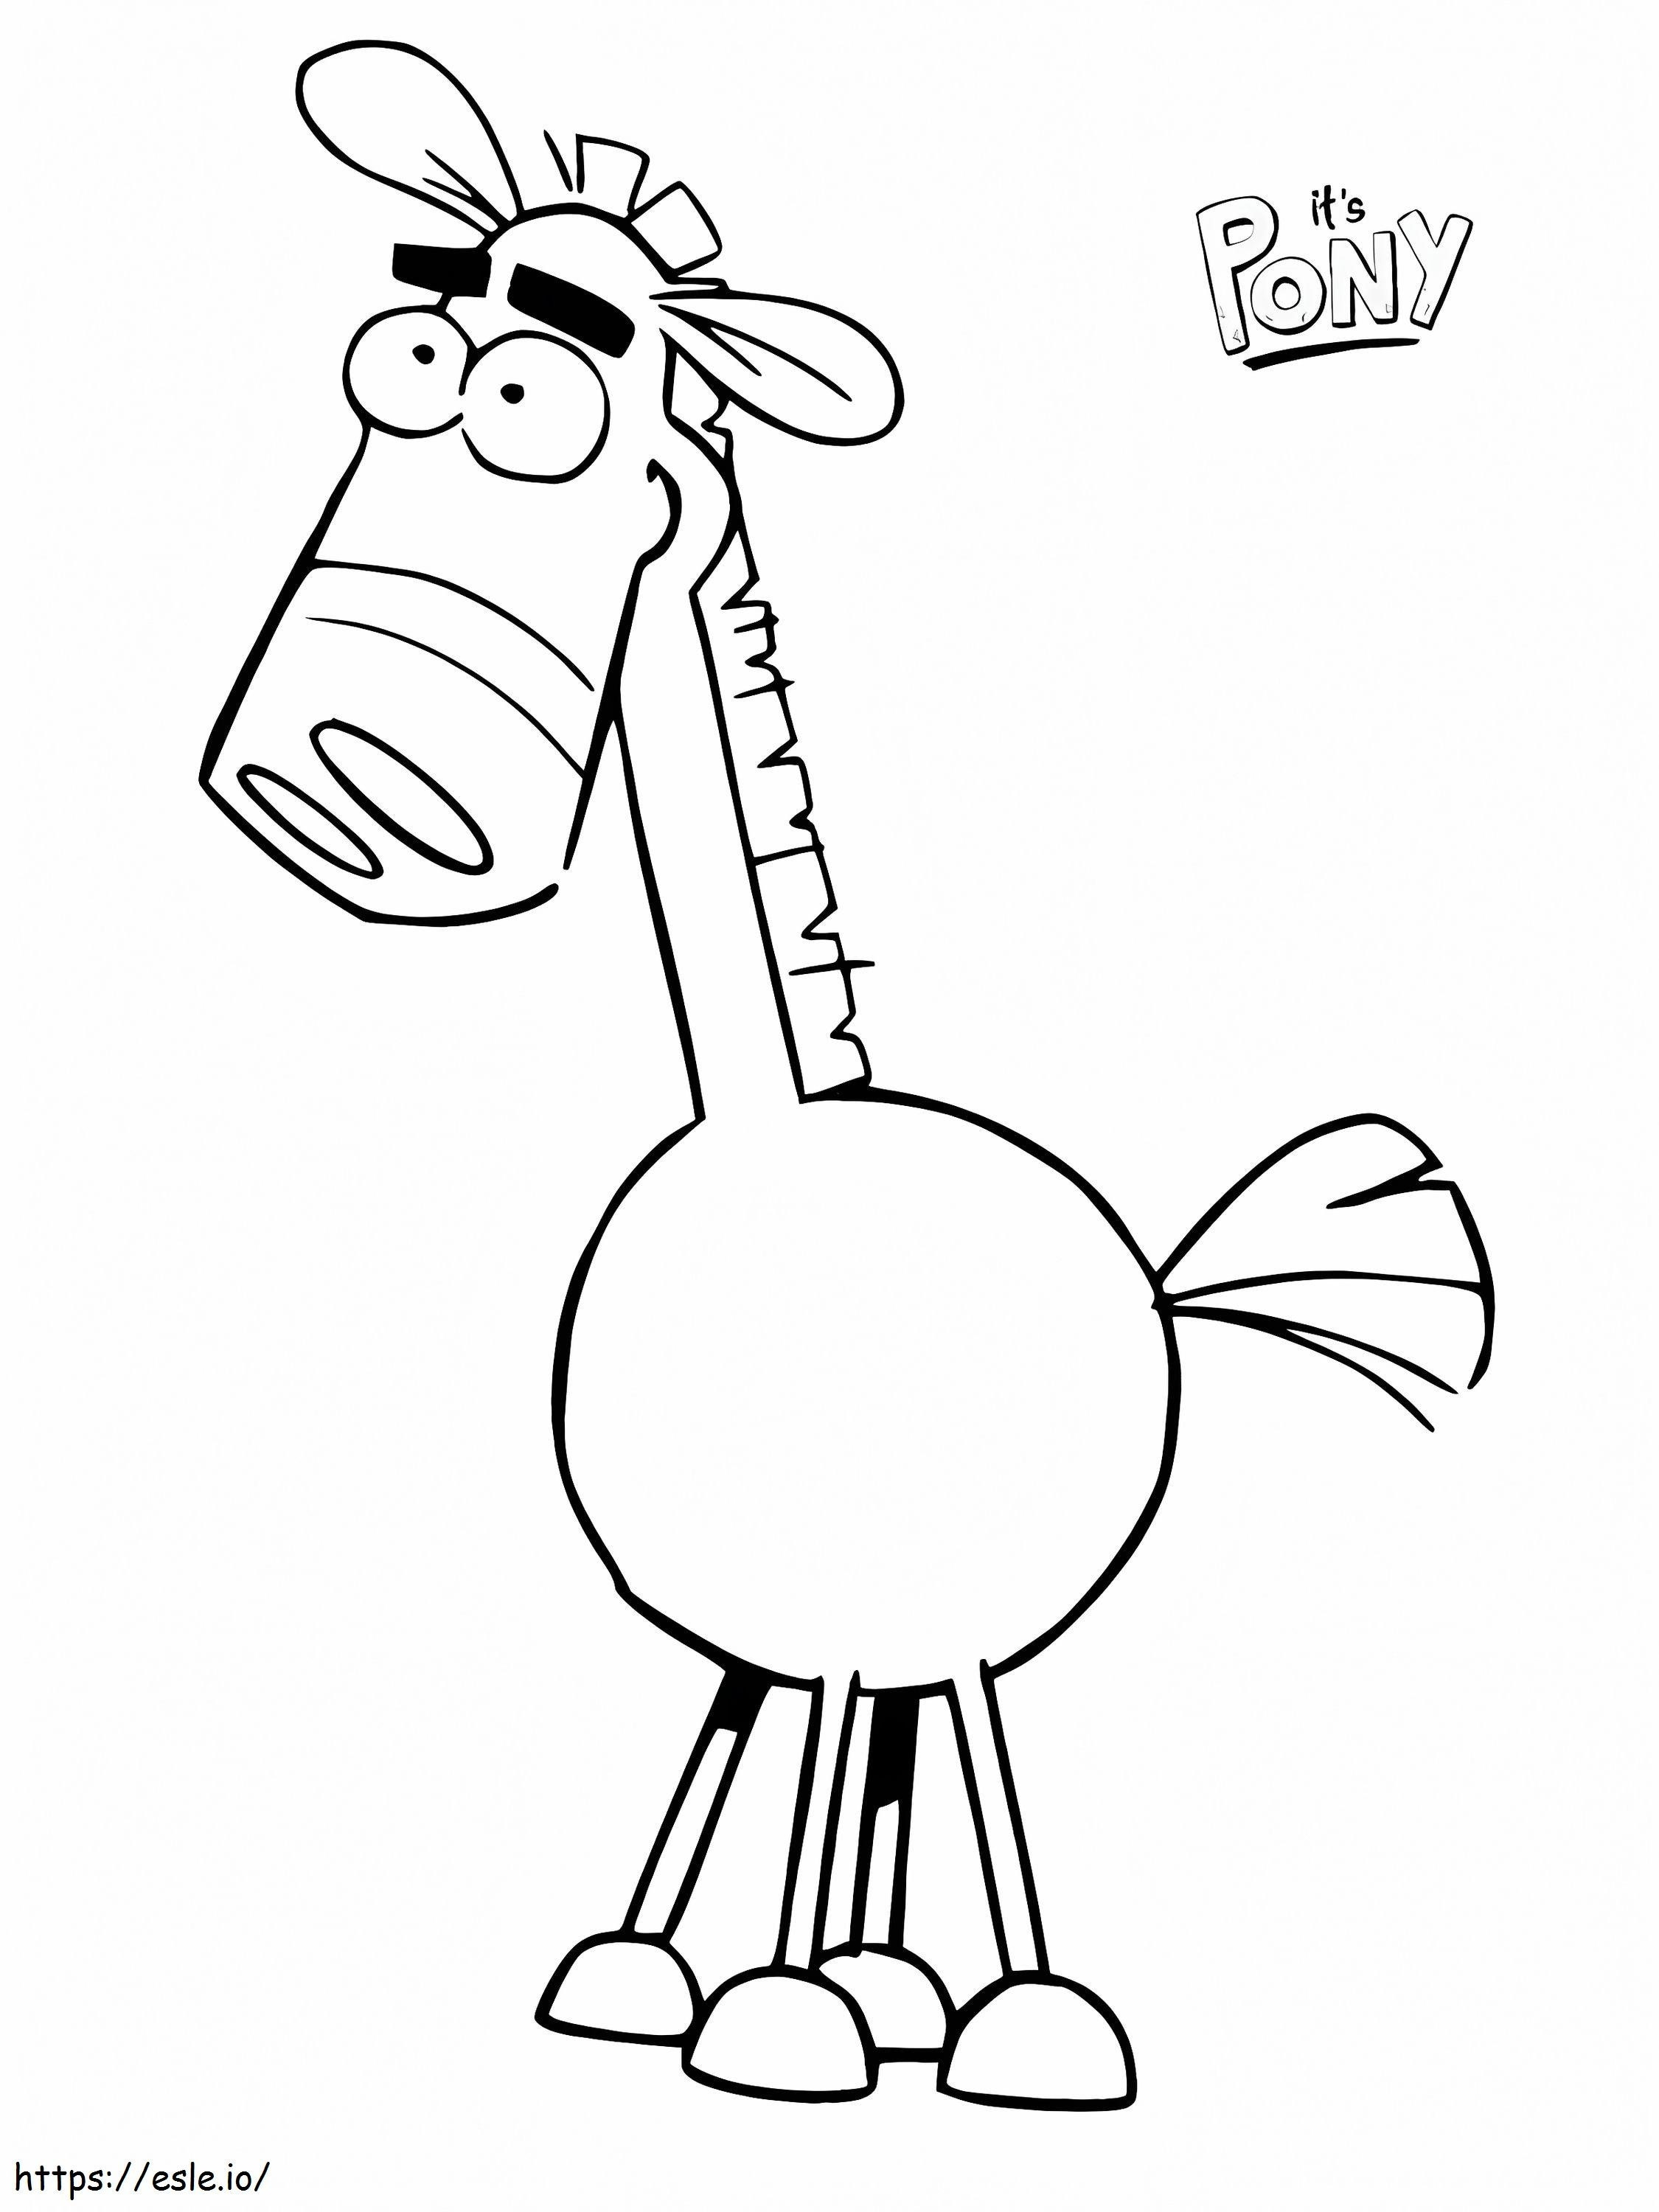 Horse Pony Its Pony coloring page